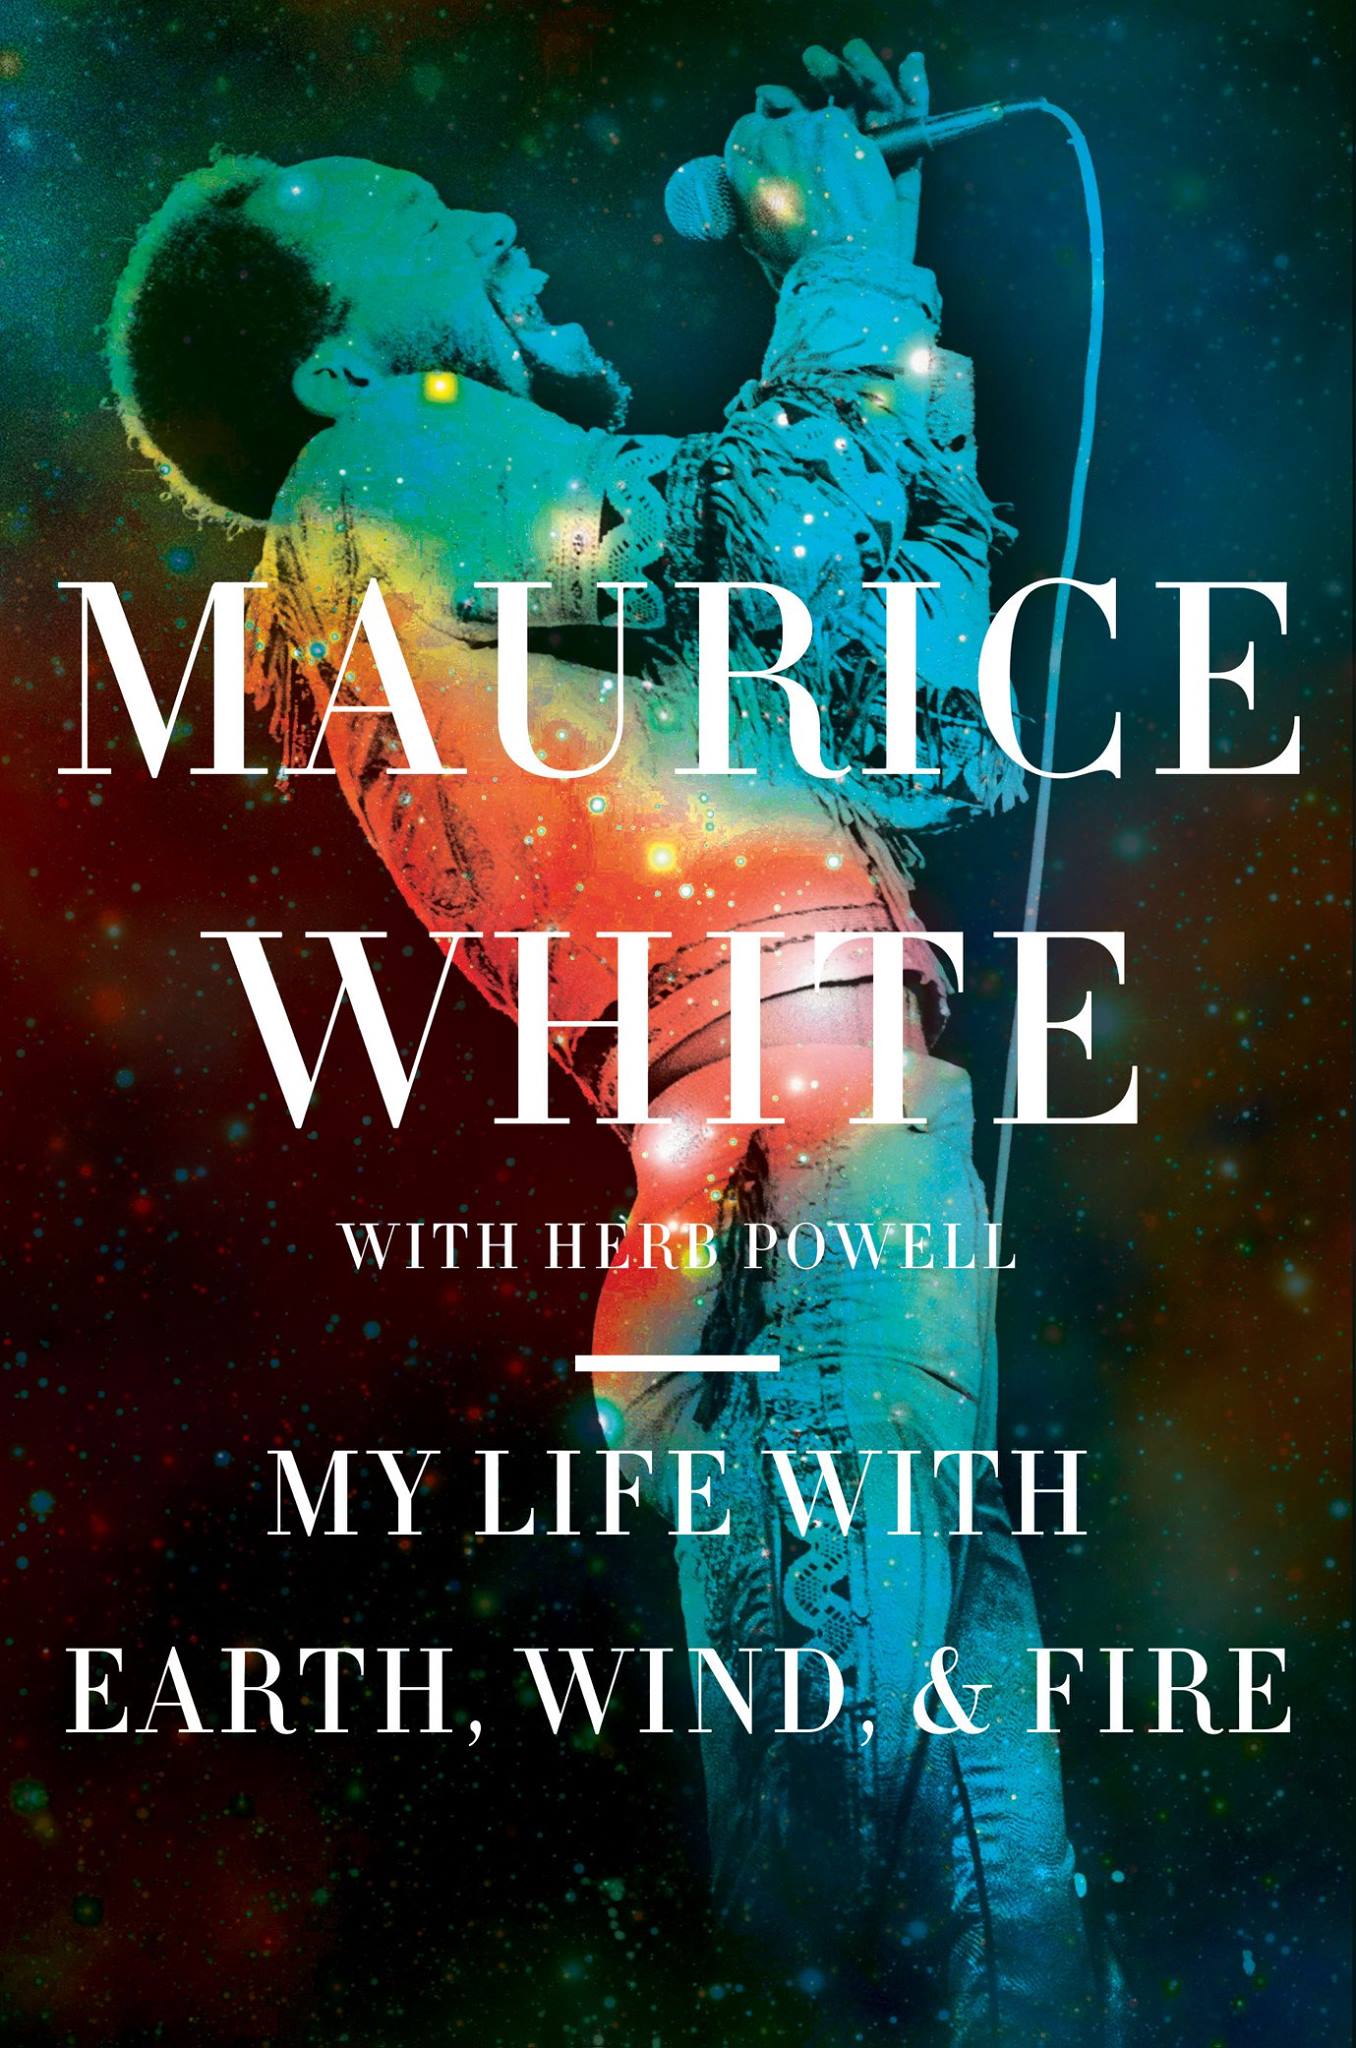 Earth Wind & Fire | Maurice White's new memoir “My Life with Earth, Wind &  Fire”